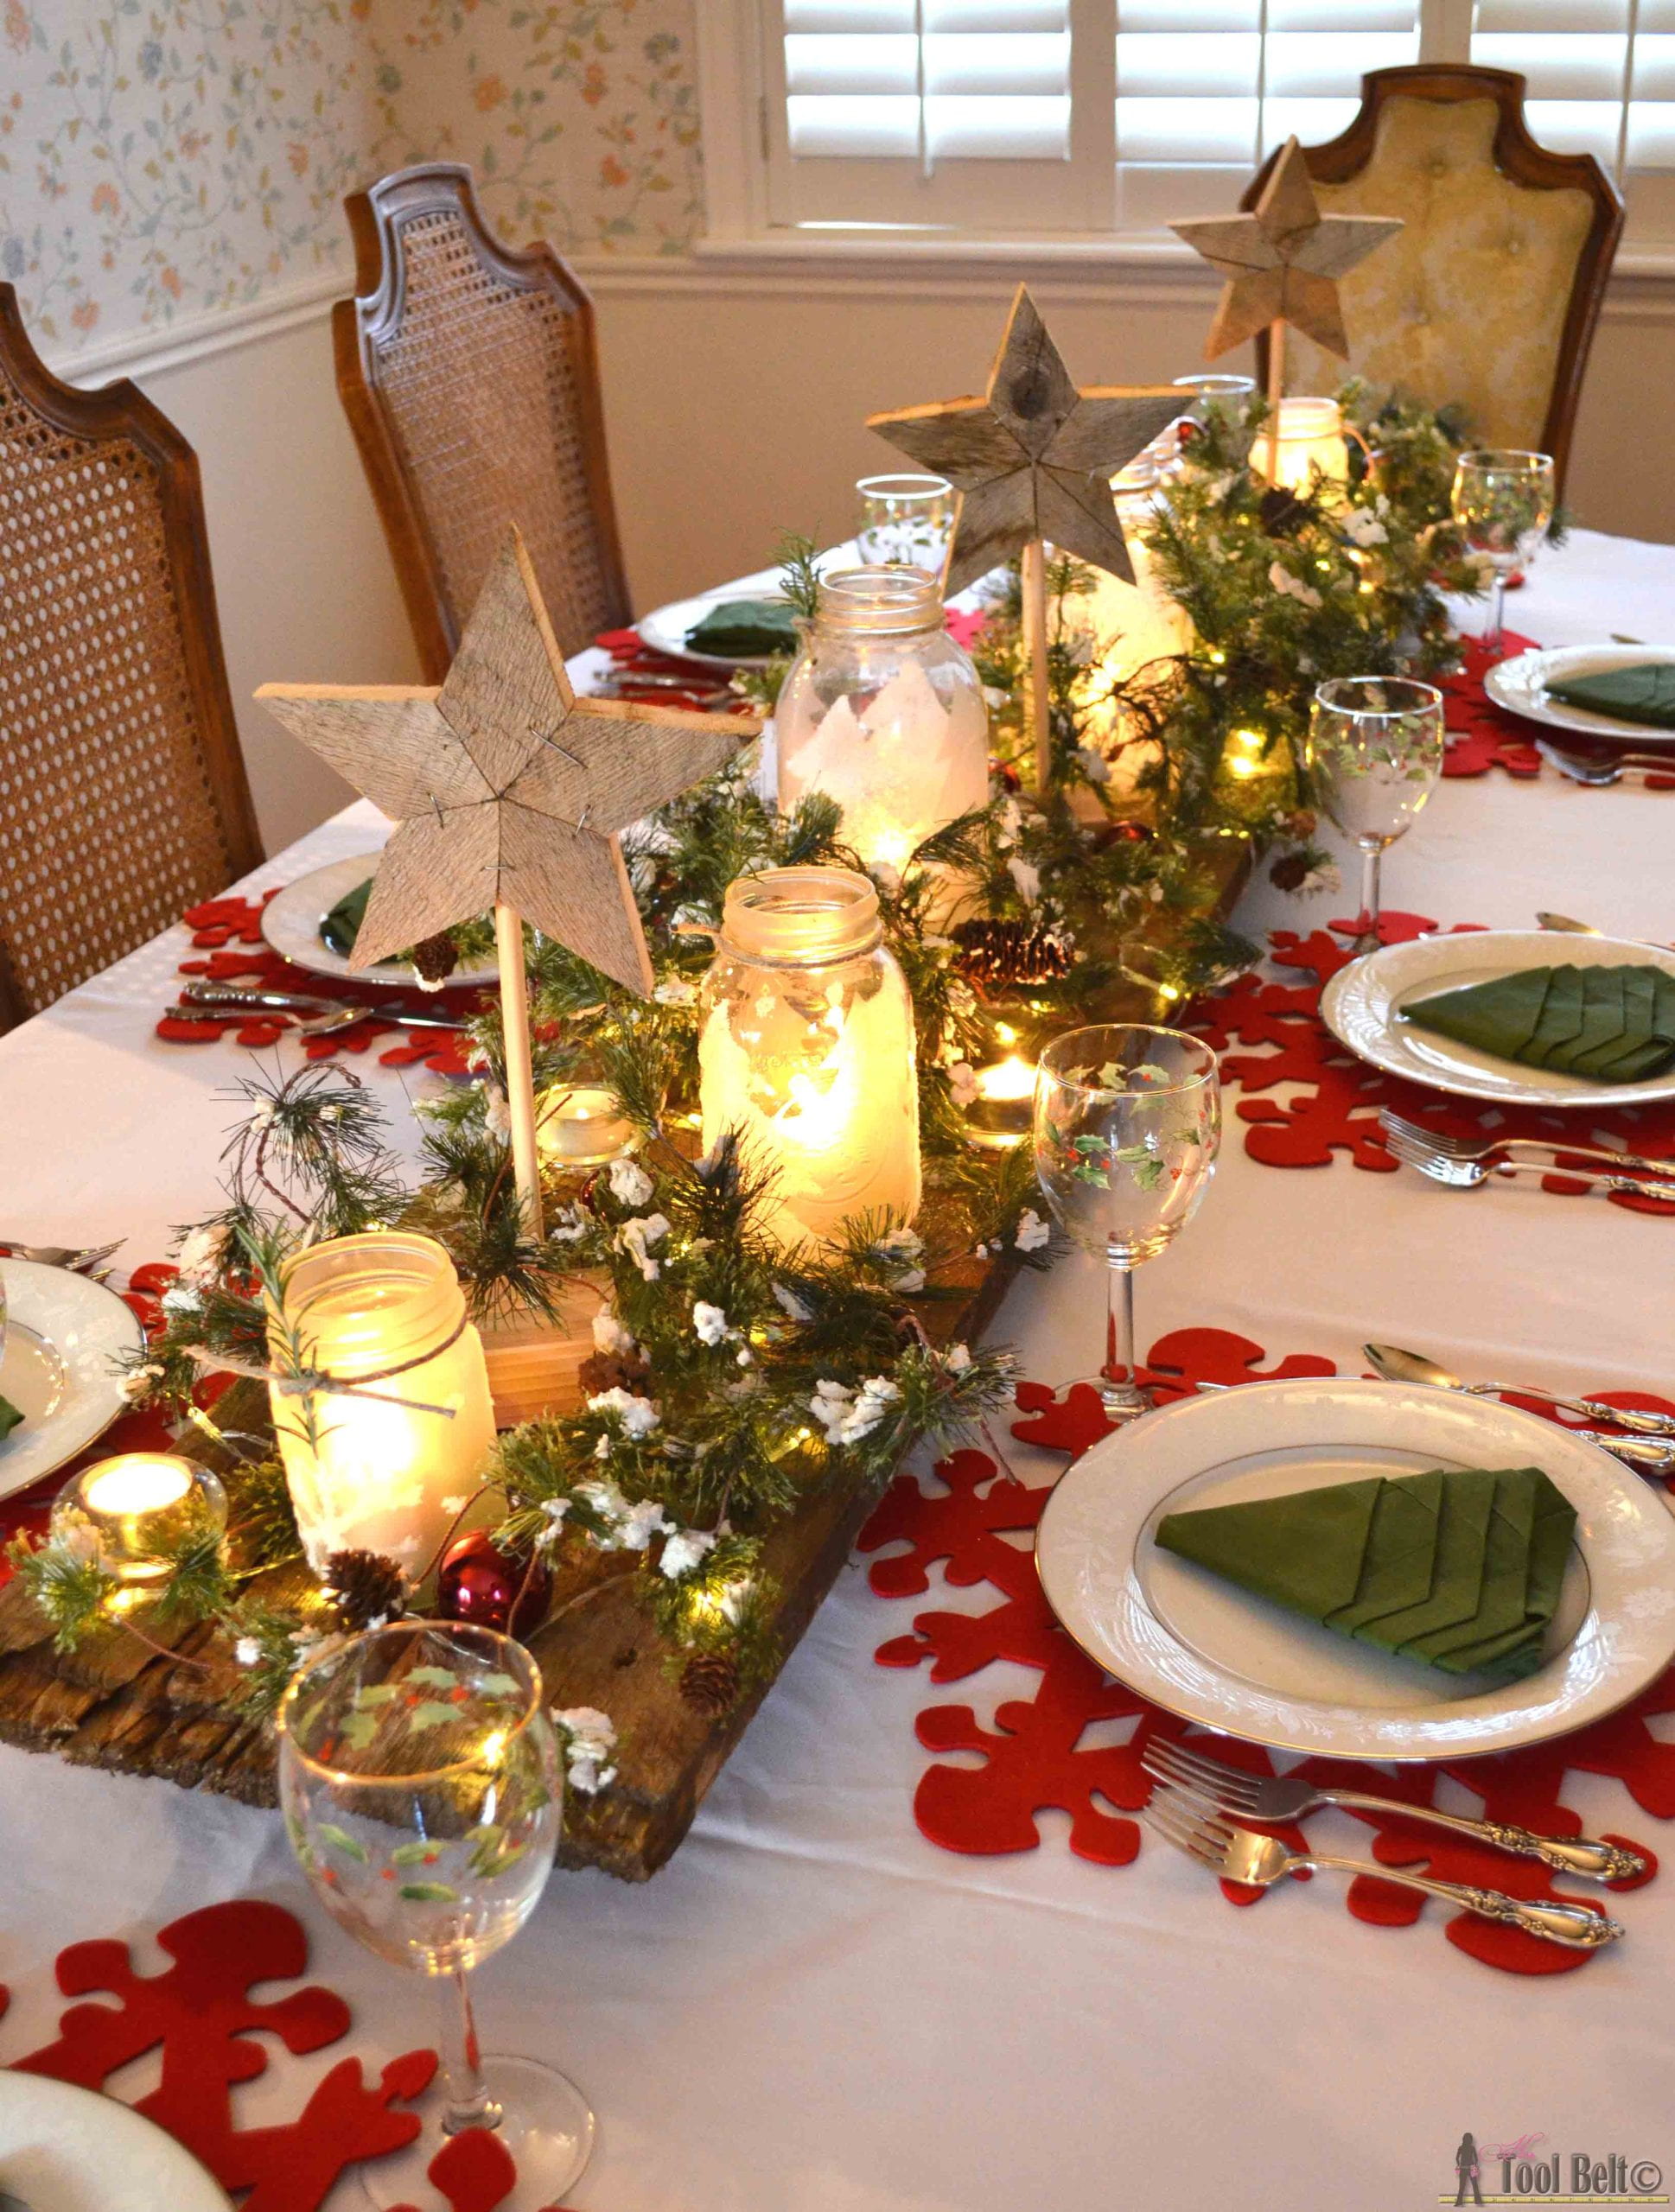 A dining table set up with Christmas decorations.